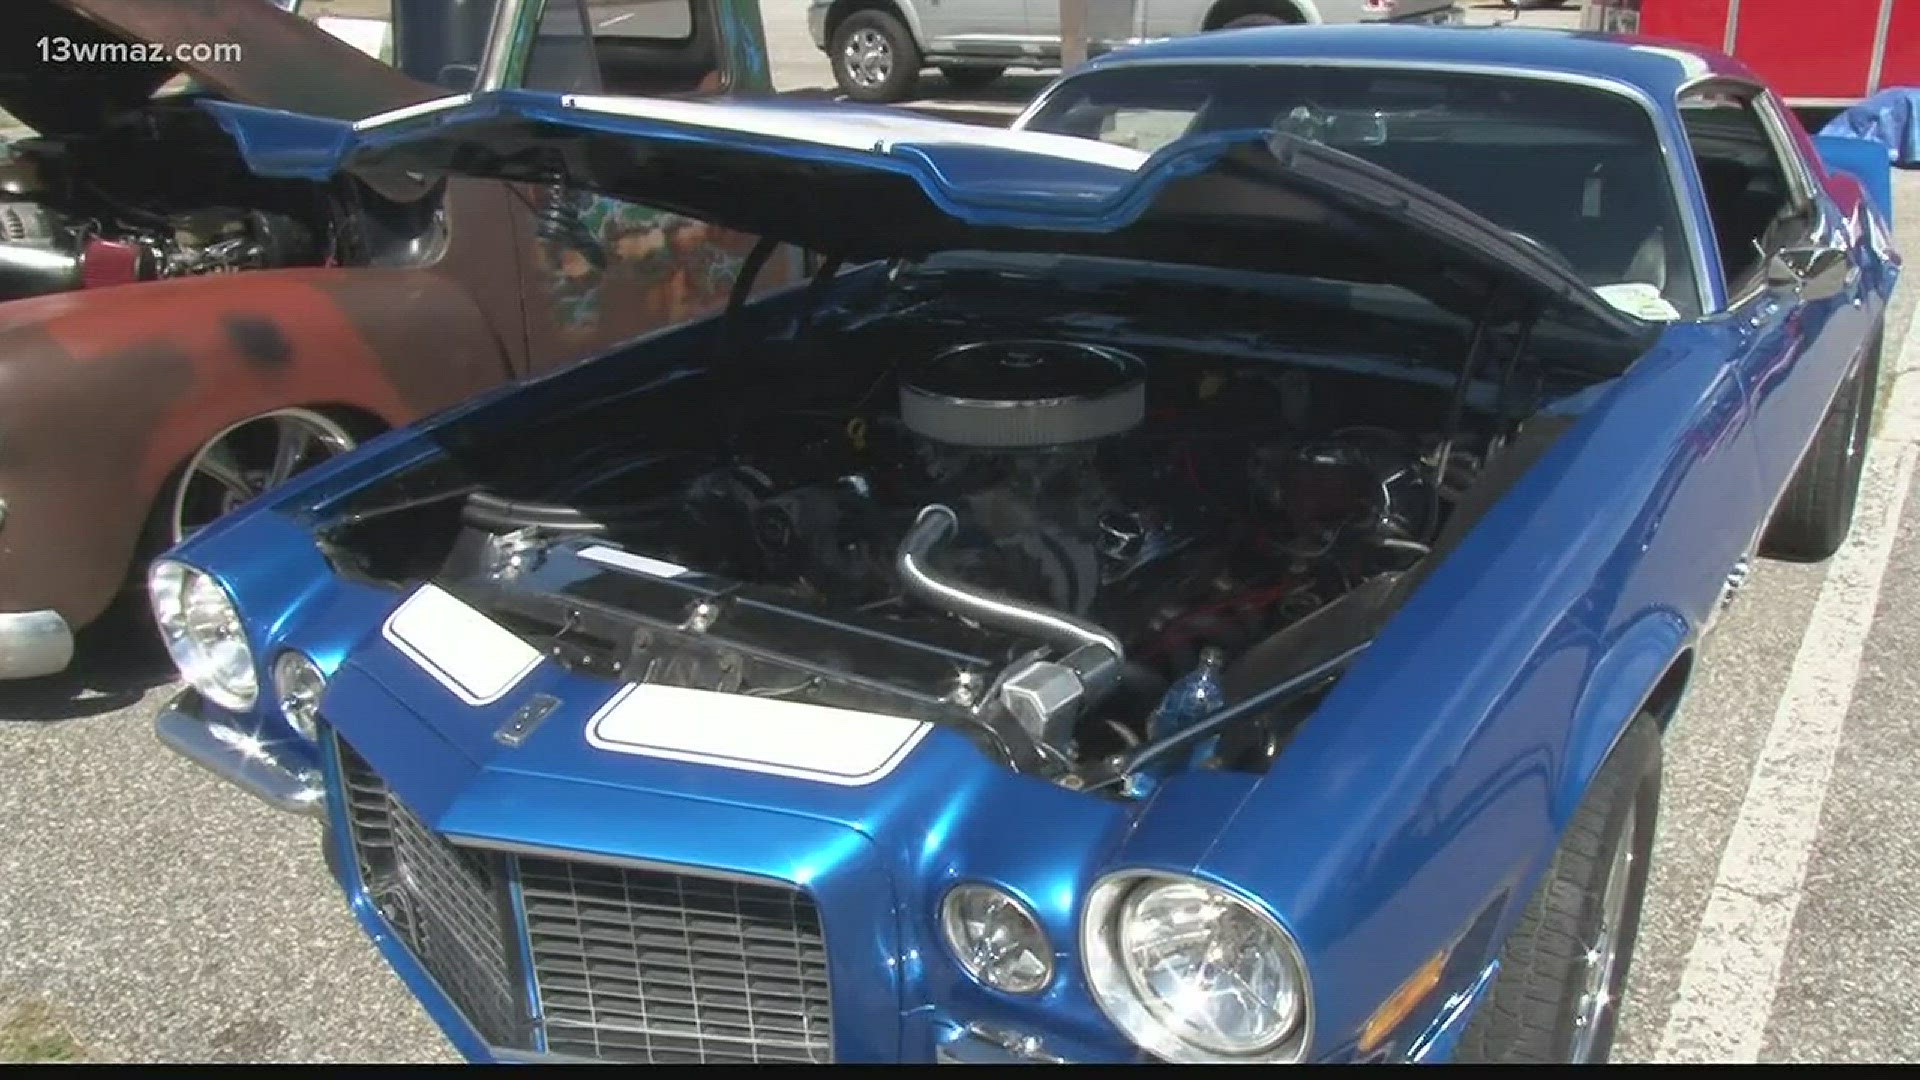 Car show in honor of Sgt. Patrick Sondron